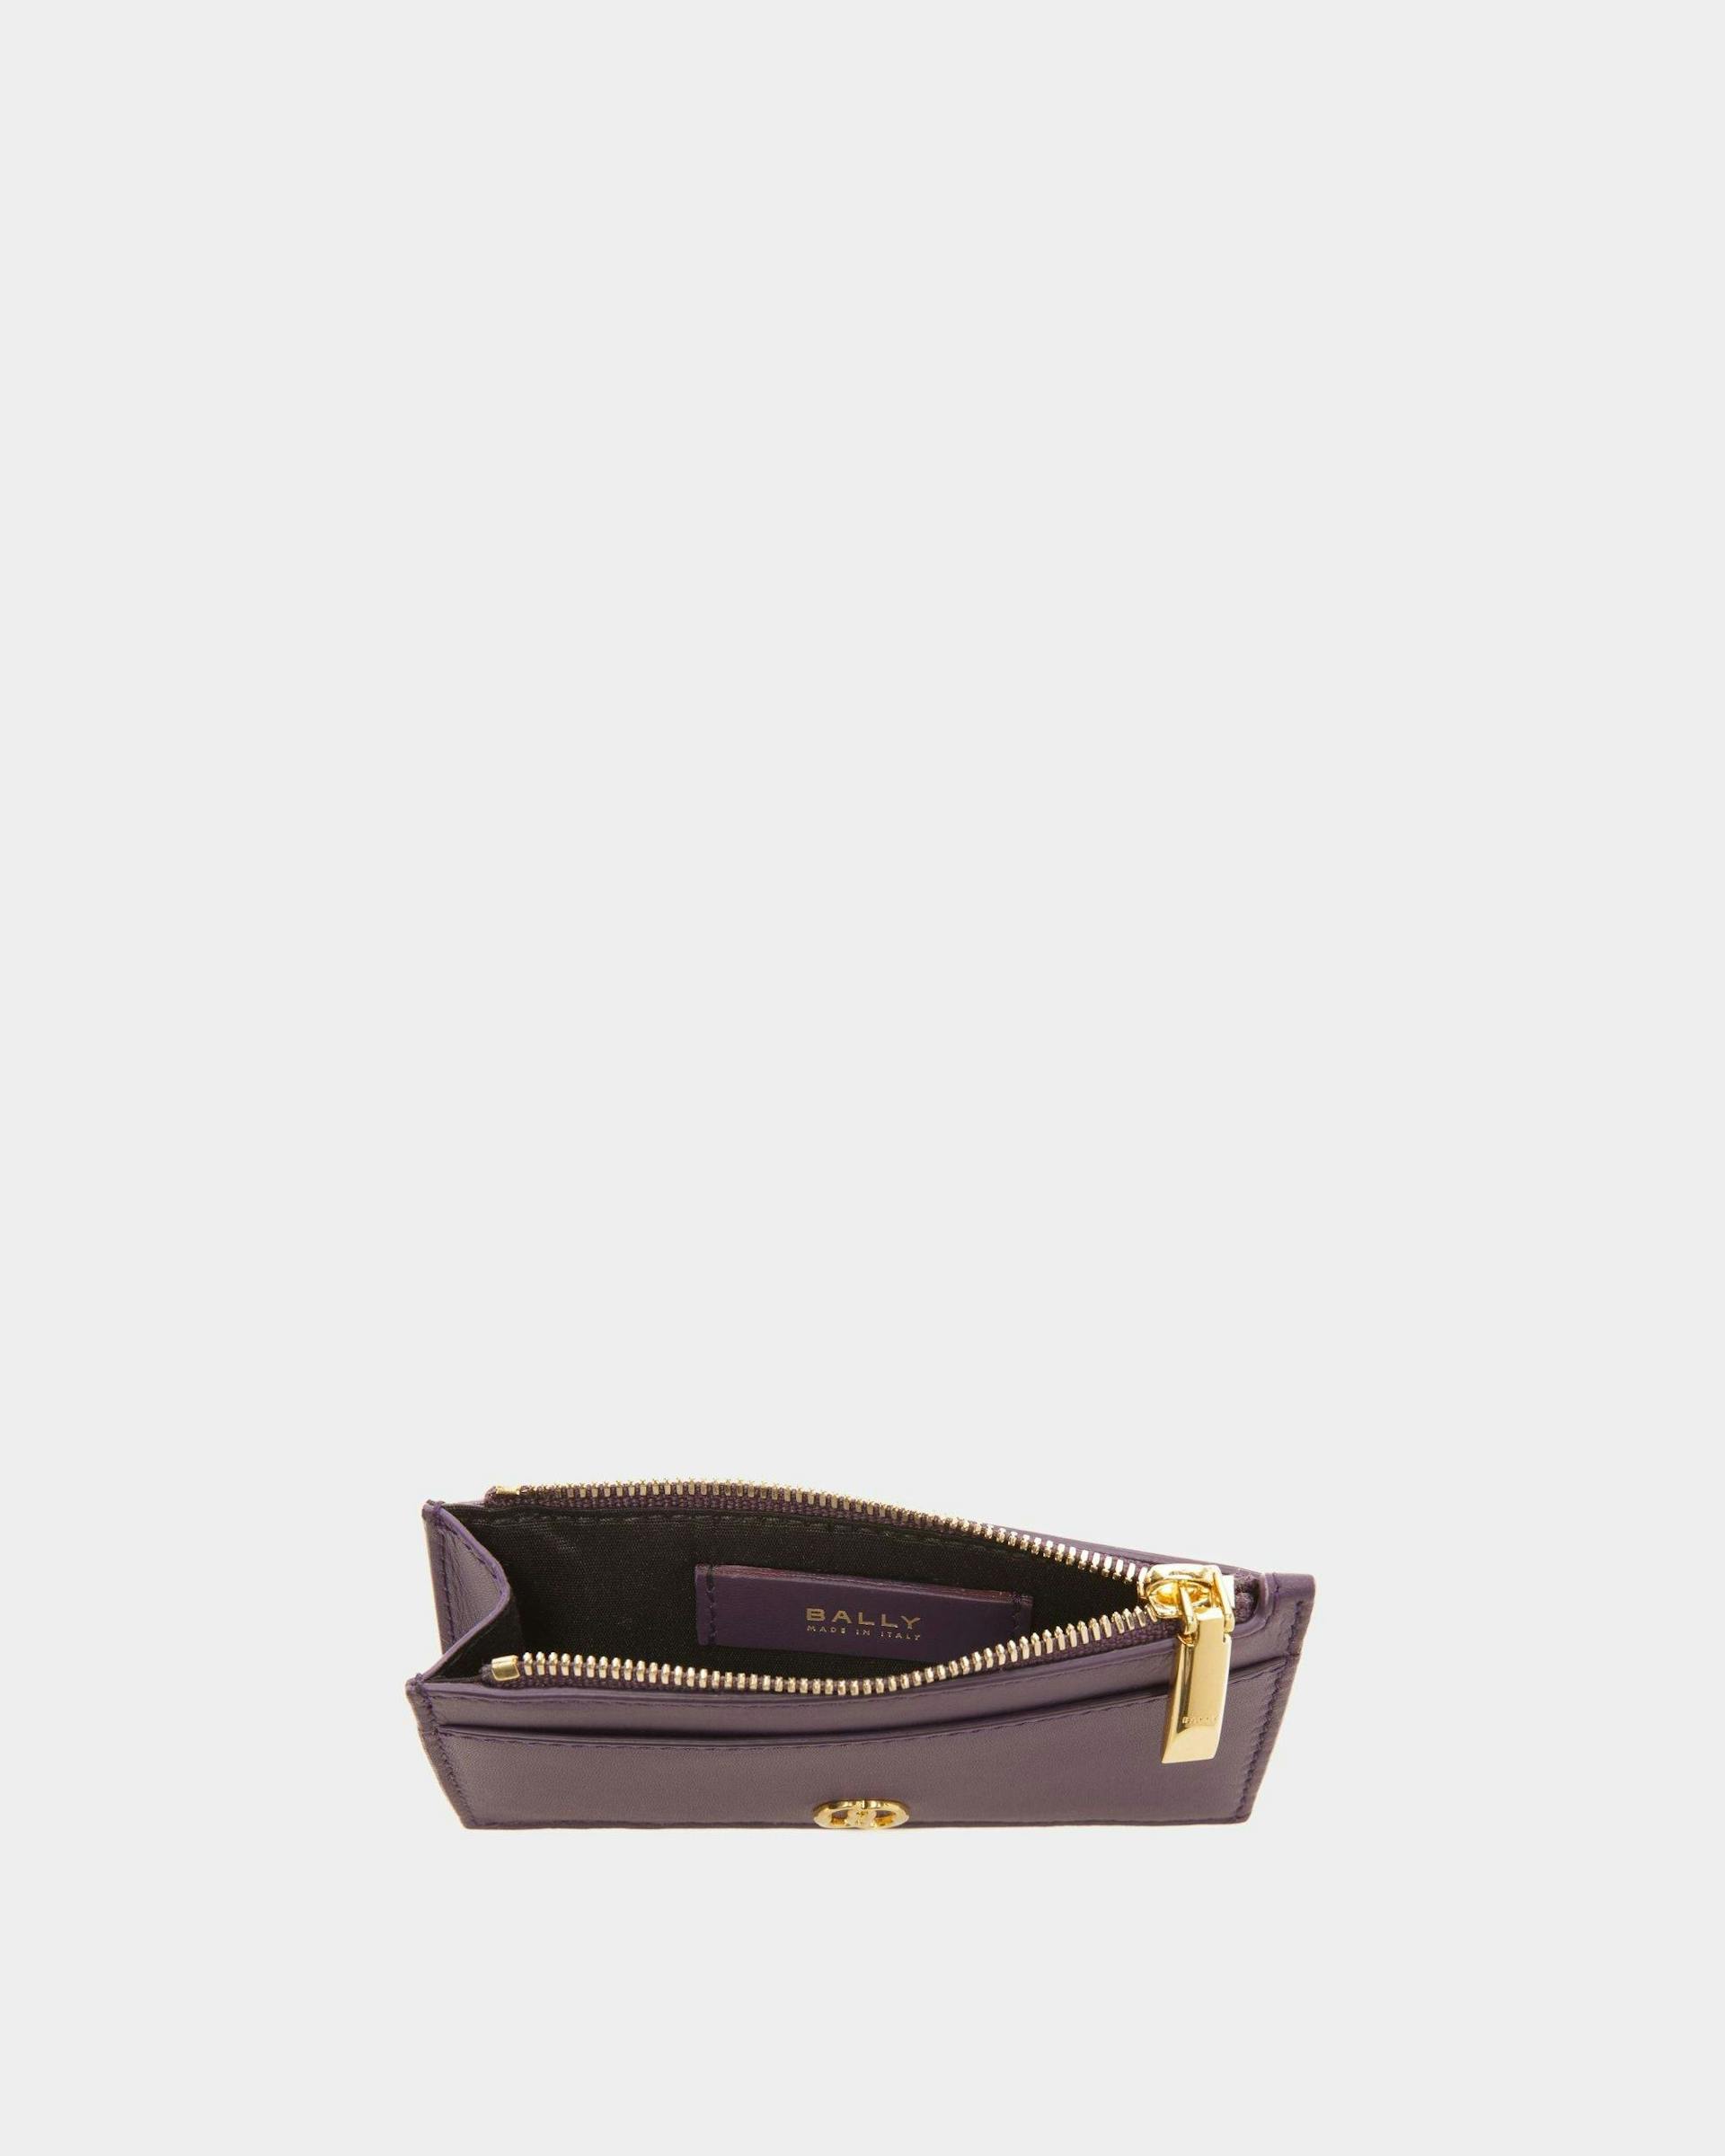 Emblem Business Card Holder In Orchid Leather - Women's - Bally - 03